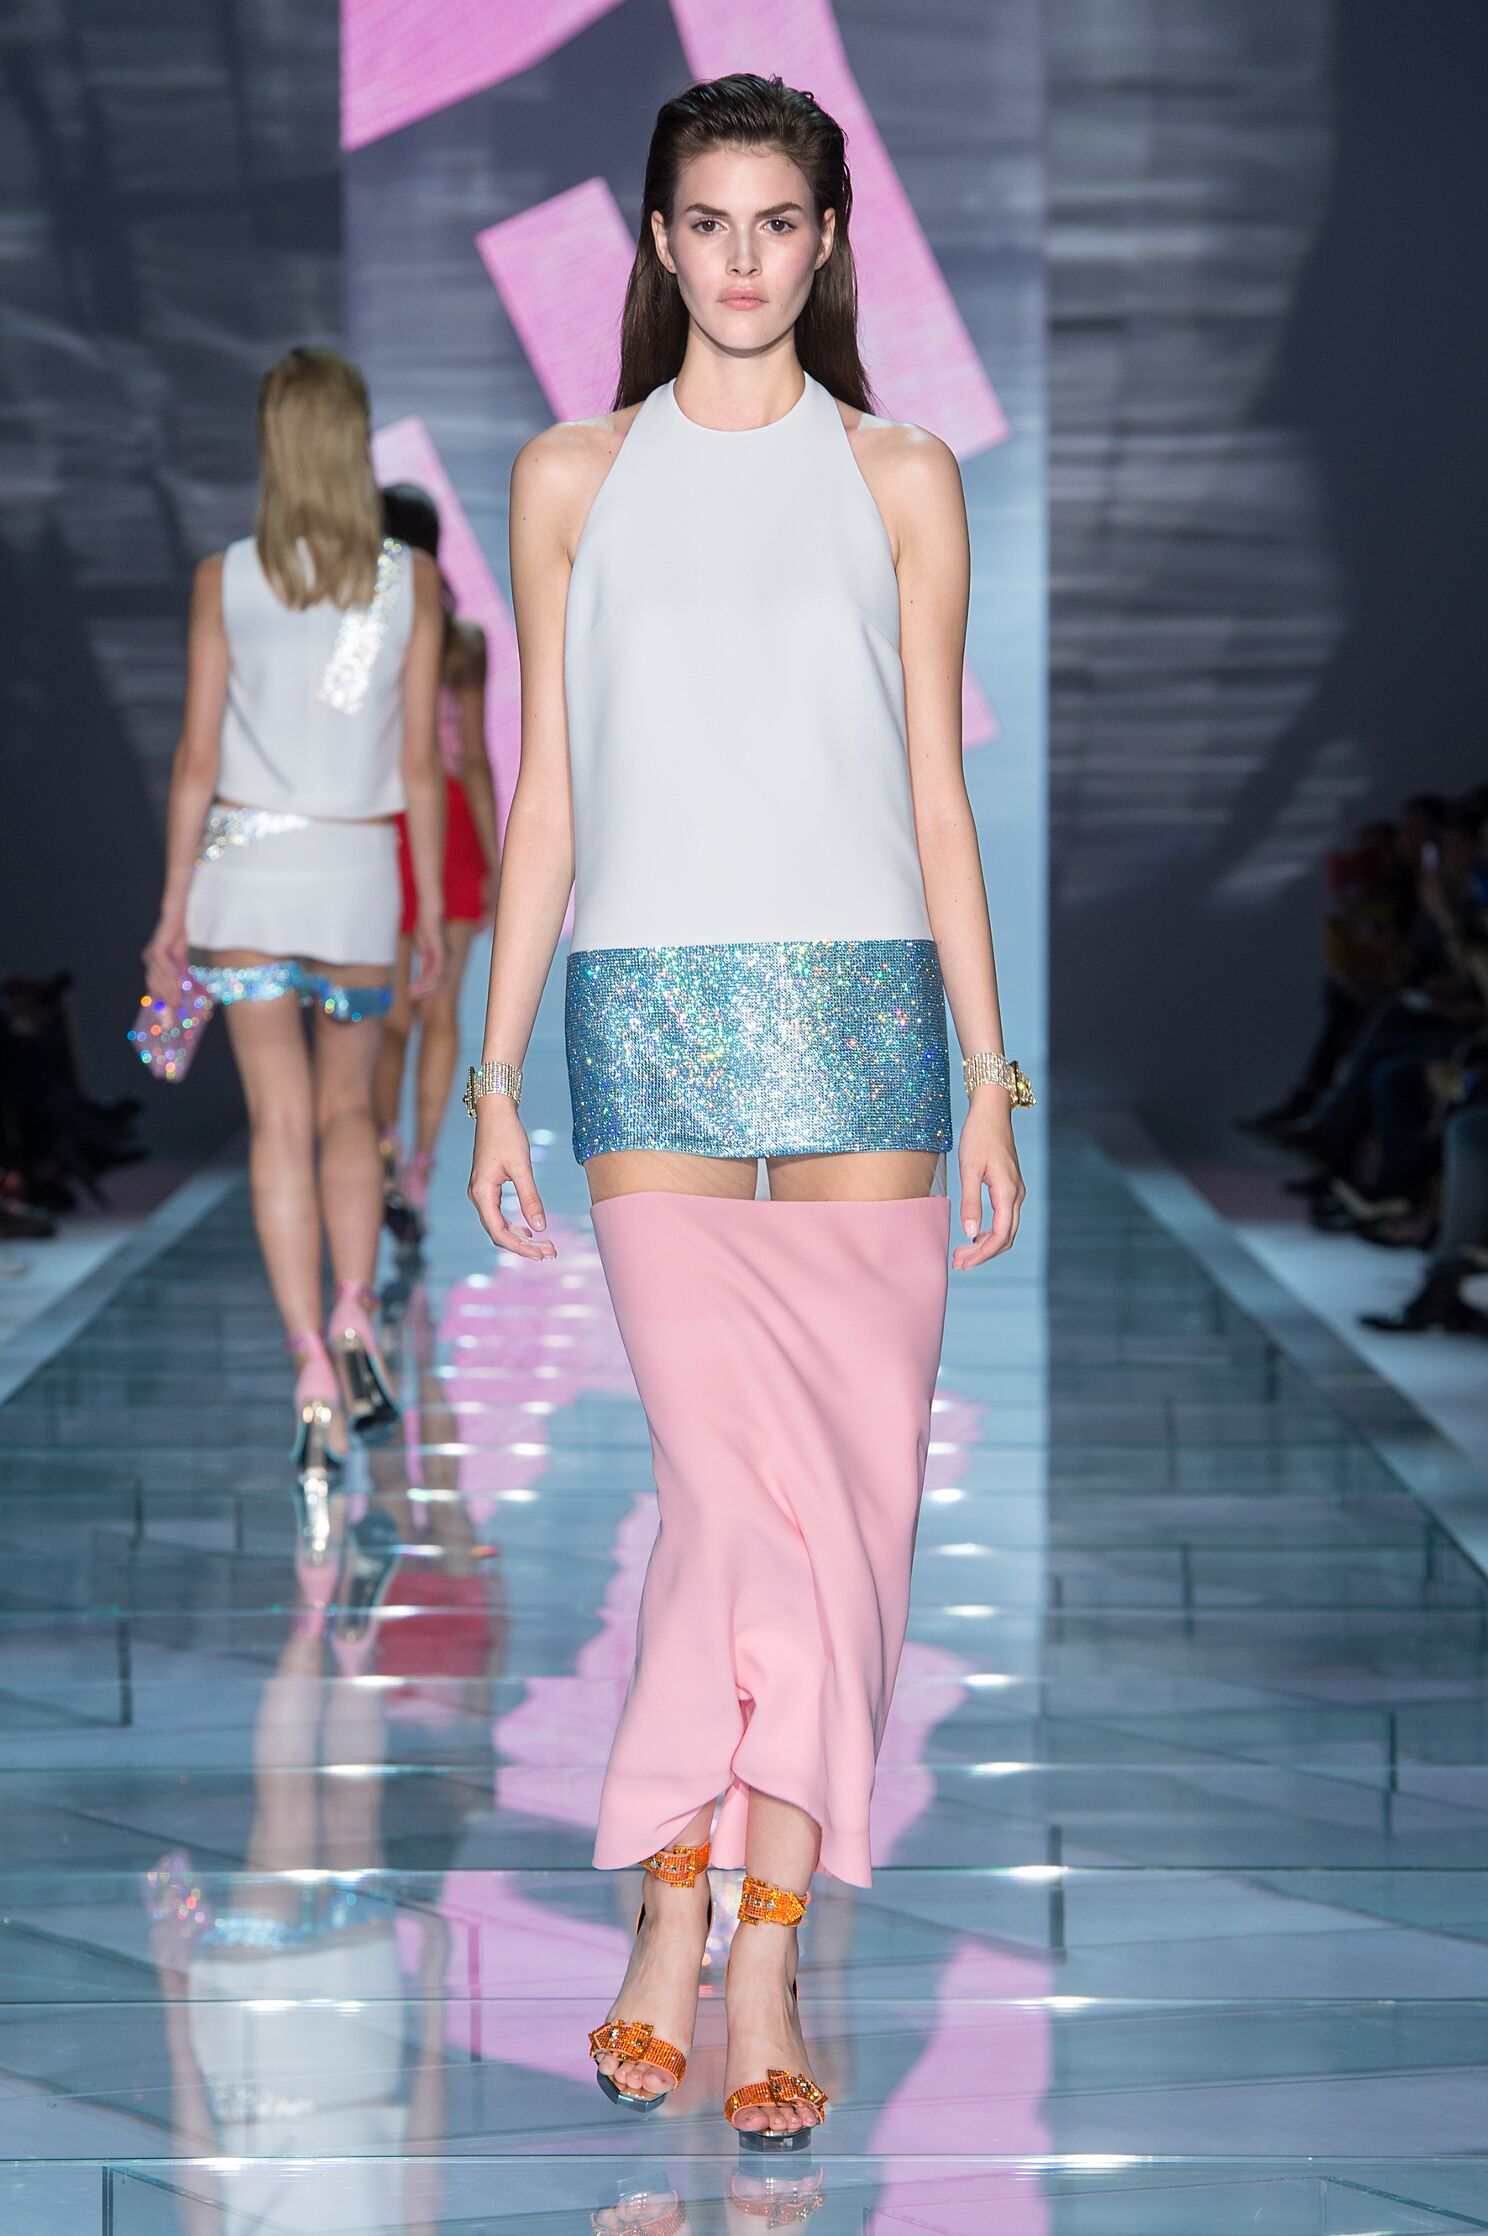 VERSACE SPRING SUMMER 2015 WOMEN’S COLLECTION | The Skinny Beep